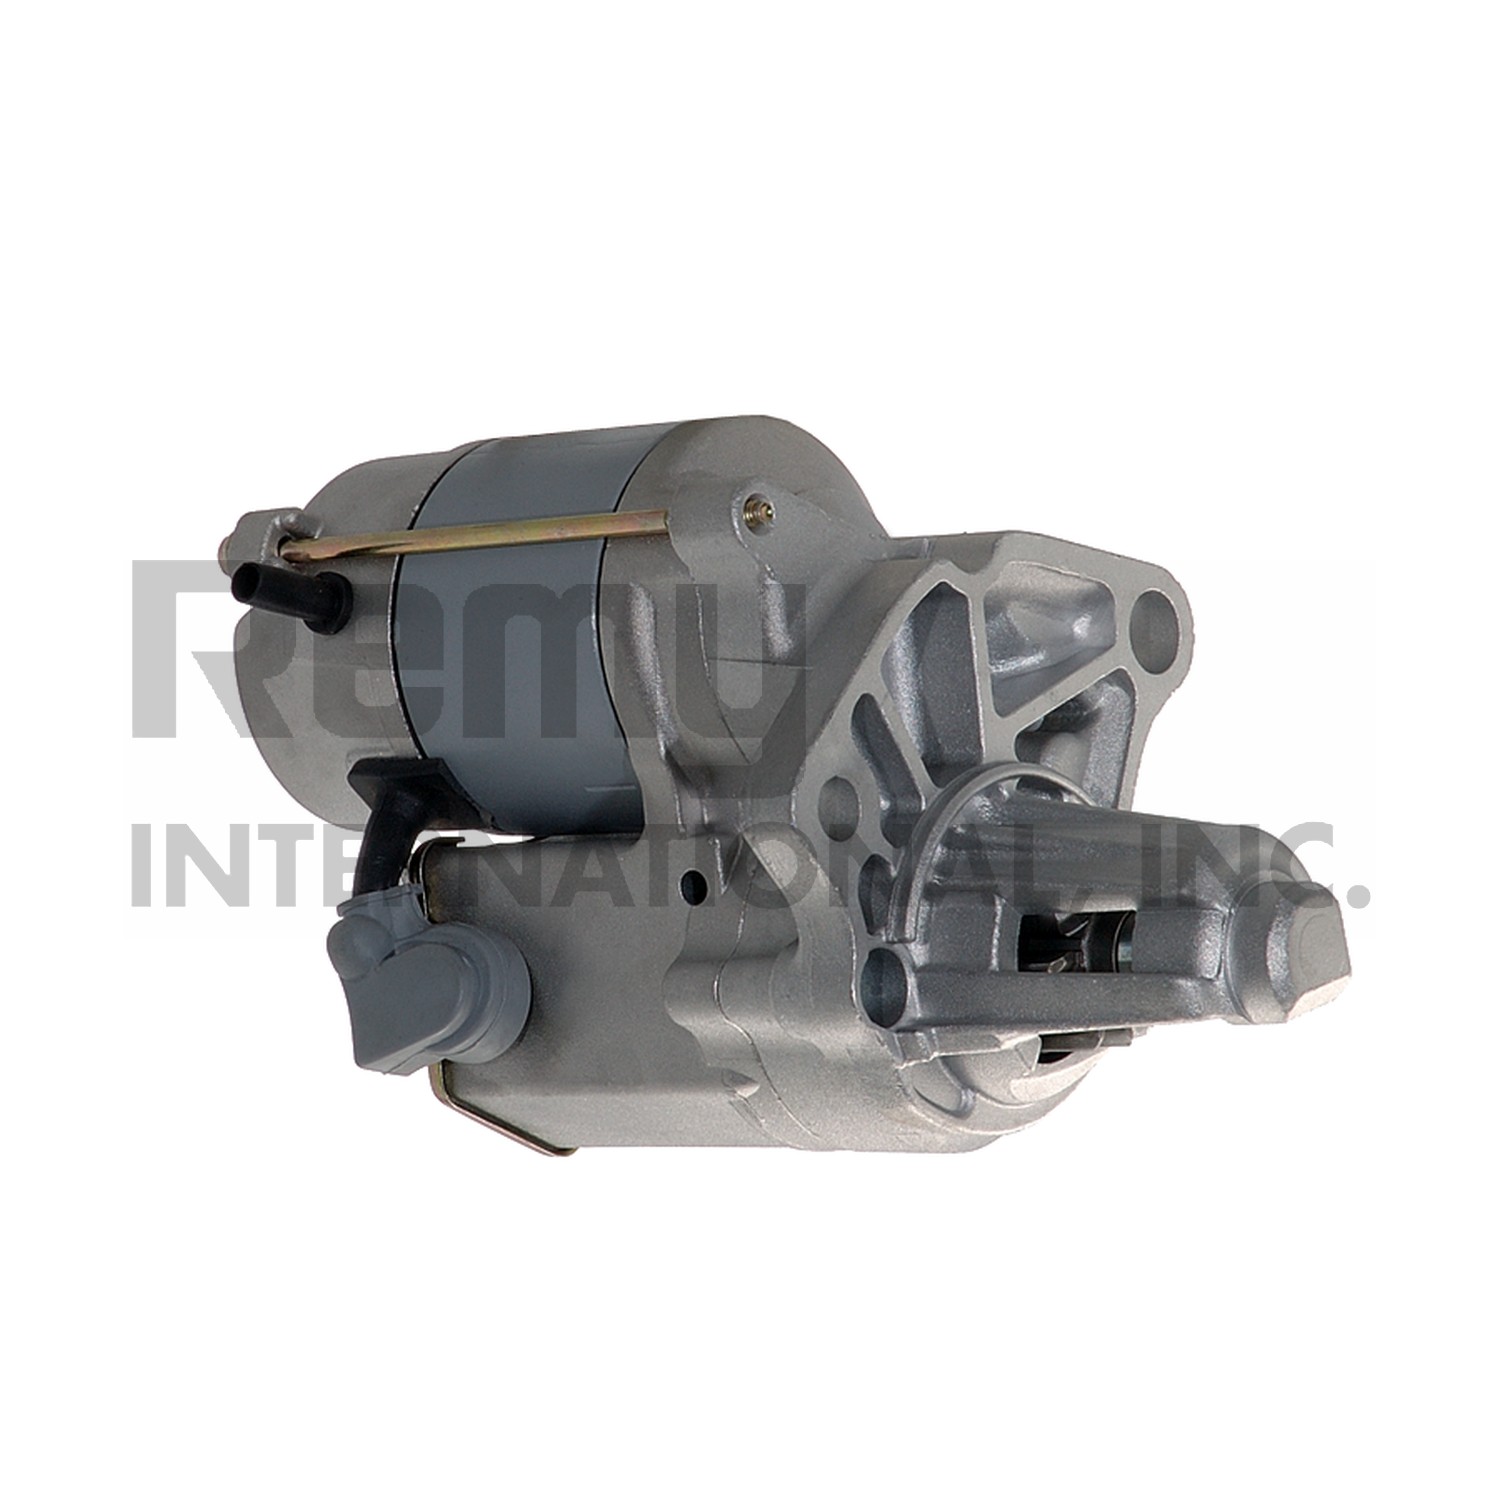 Denso First Time Fit(R) Starter Motor - 280-0144-